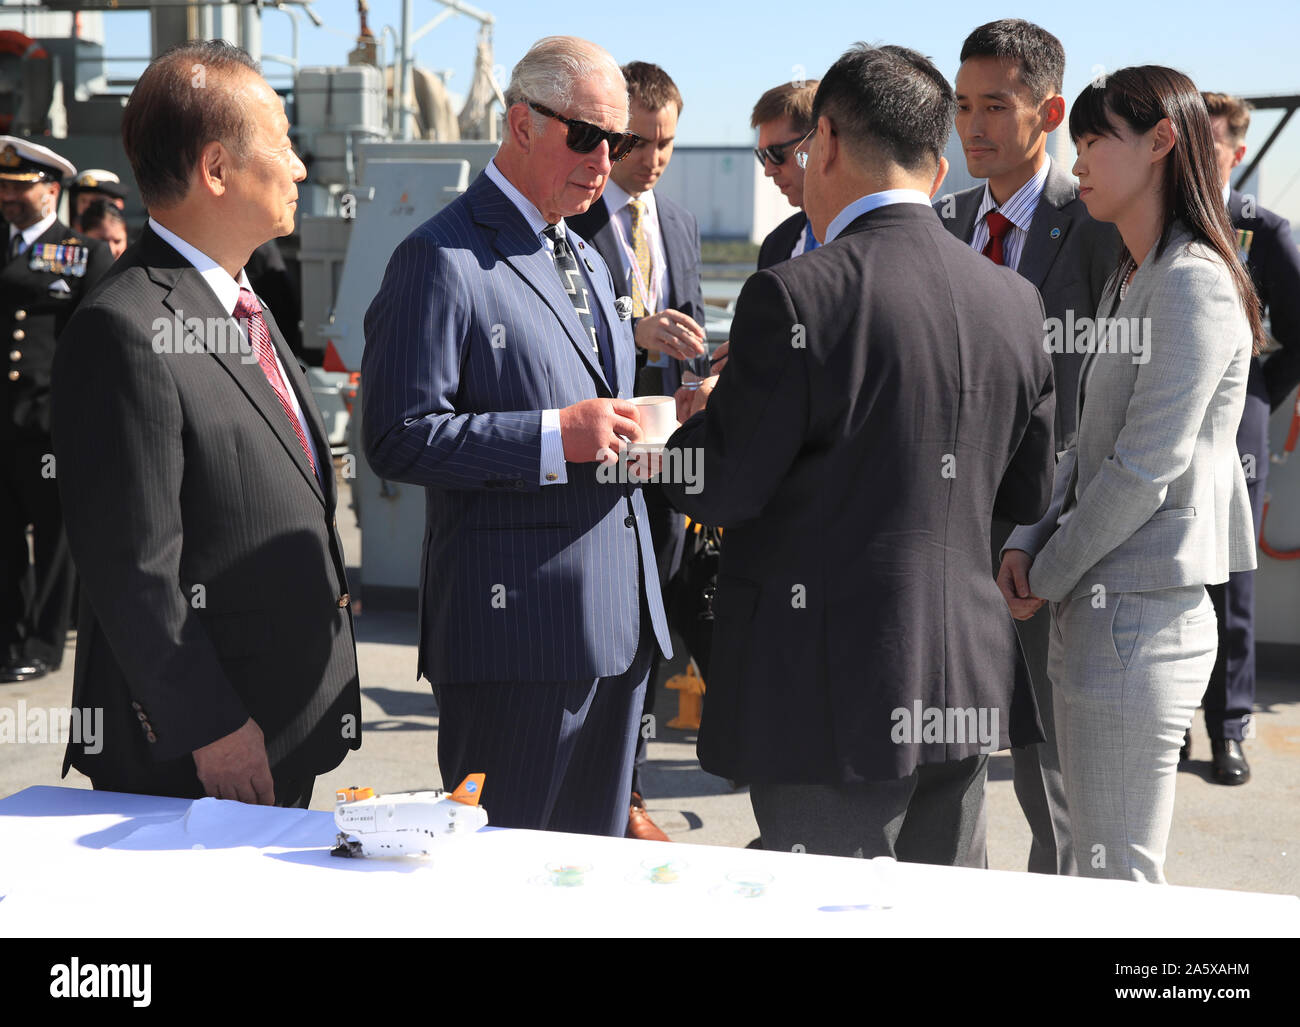 The Prince of Wales meets with representatives of groups tackling ocean plastics and climate change during a visit to HMS Enterprise, which is moored at Harumi Pier in Tokyo, Japan. Stock Photo